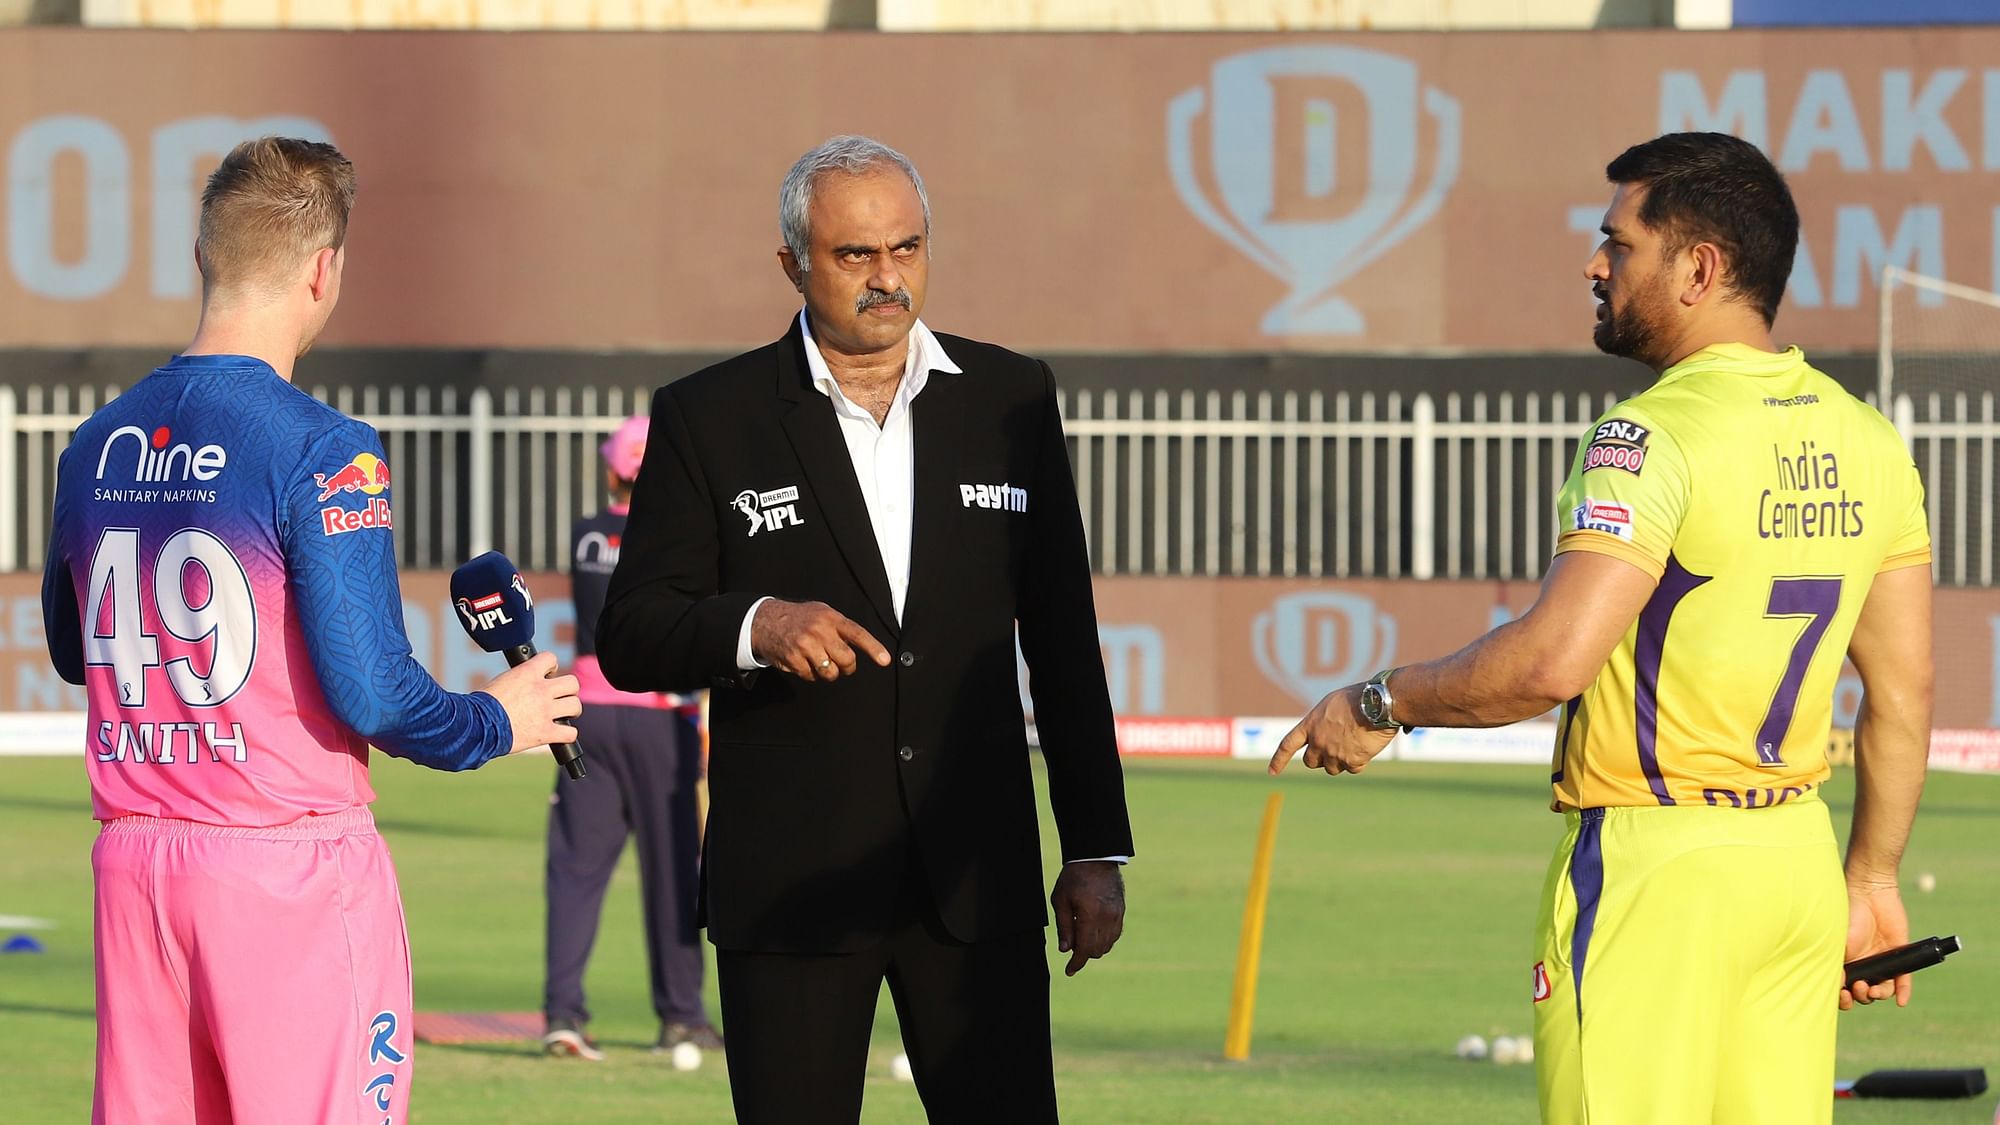 MS Dhoni has won the toss and elected to bowl first vs Rajasthan Royals.